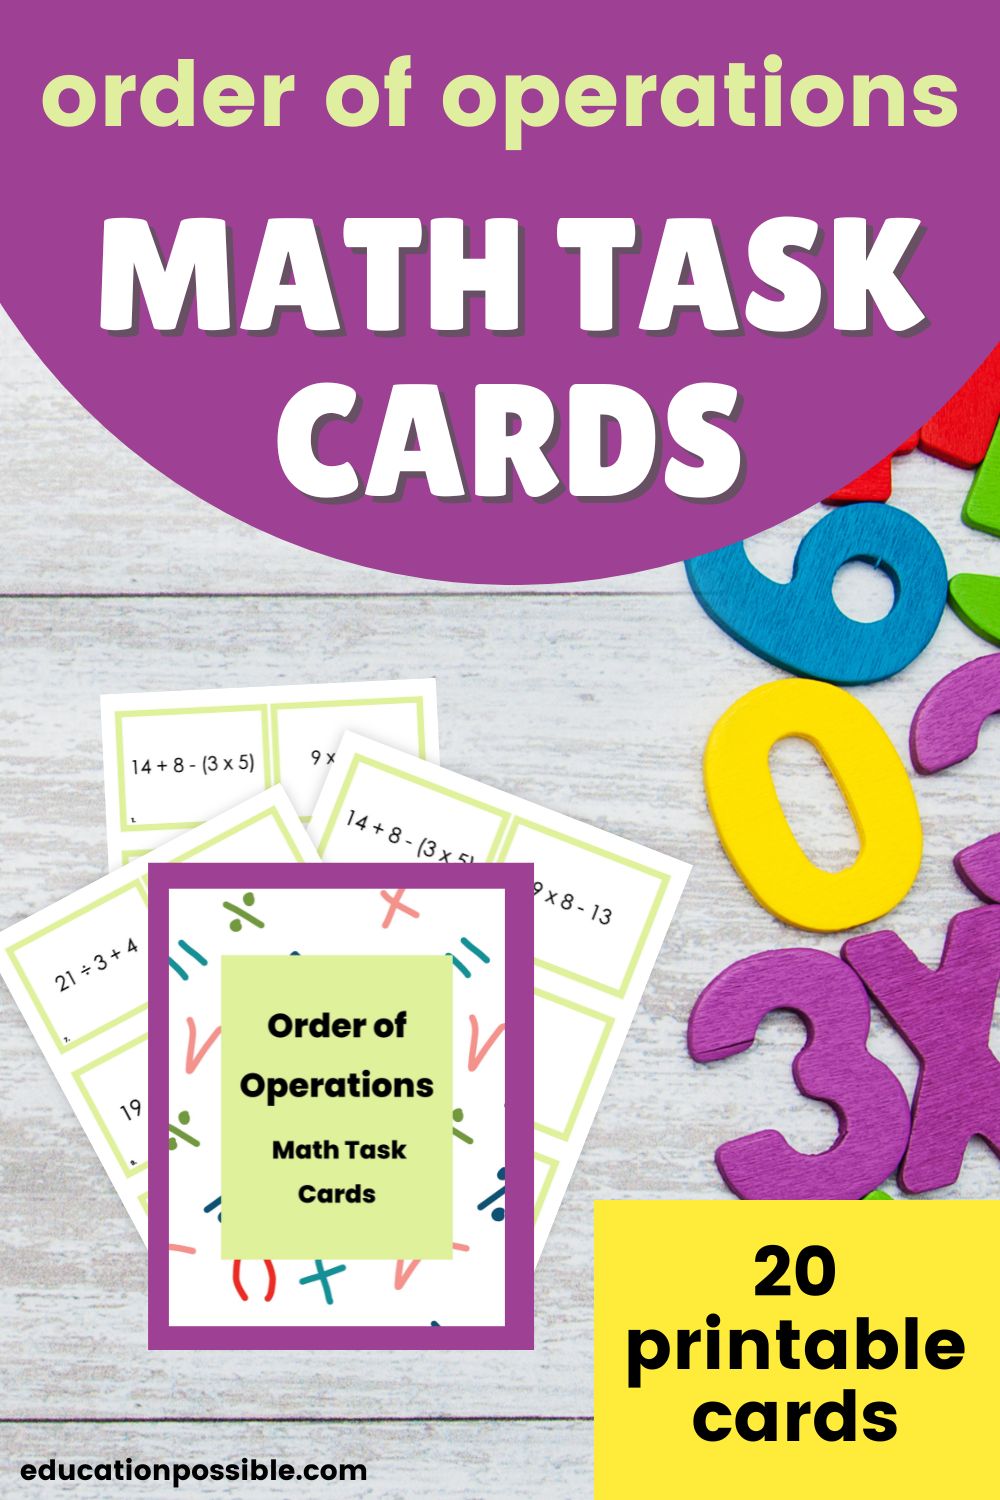 Order of Operations Math Task Cards